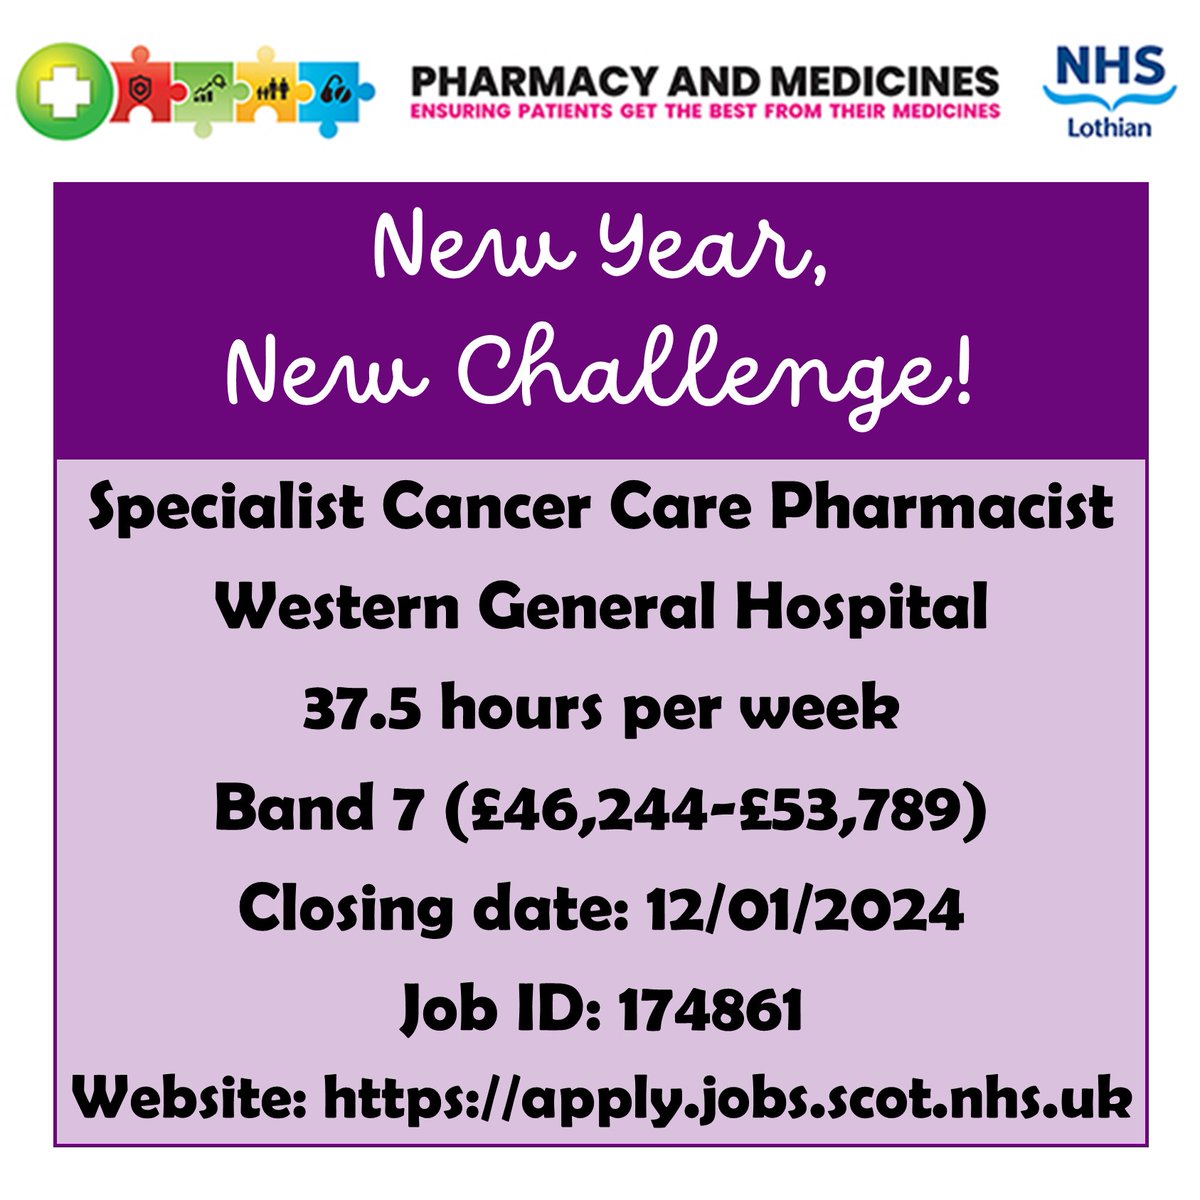 The pharmacy team at the Edinburgh Cancer Centre are looking for a pharmacist to join their rotational specialist pharmacist team at the WGH. Apply now at: apply.jobs.scot.nhs.uk/Job/JobDetail?… More information about working for NHS Lothian Pharmacy is available at: careers.nhslothian.scot/careers/pharma…